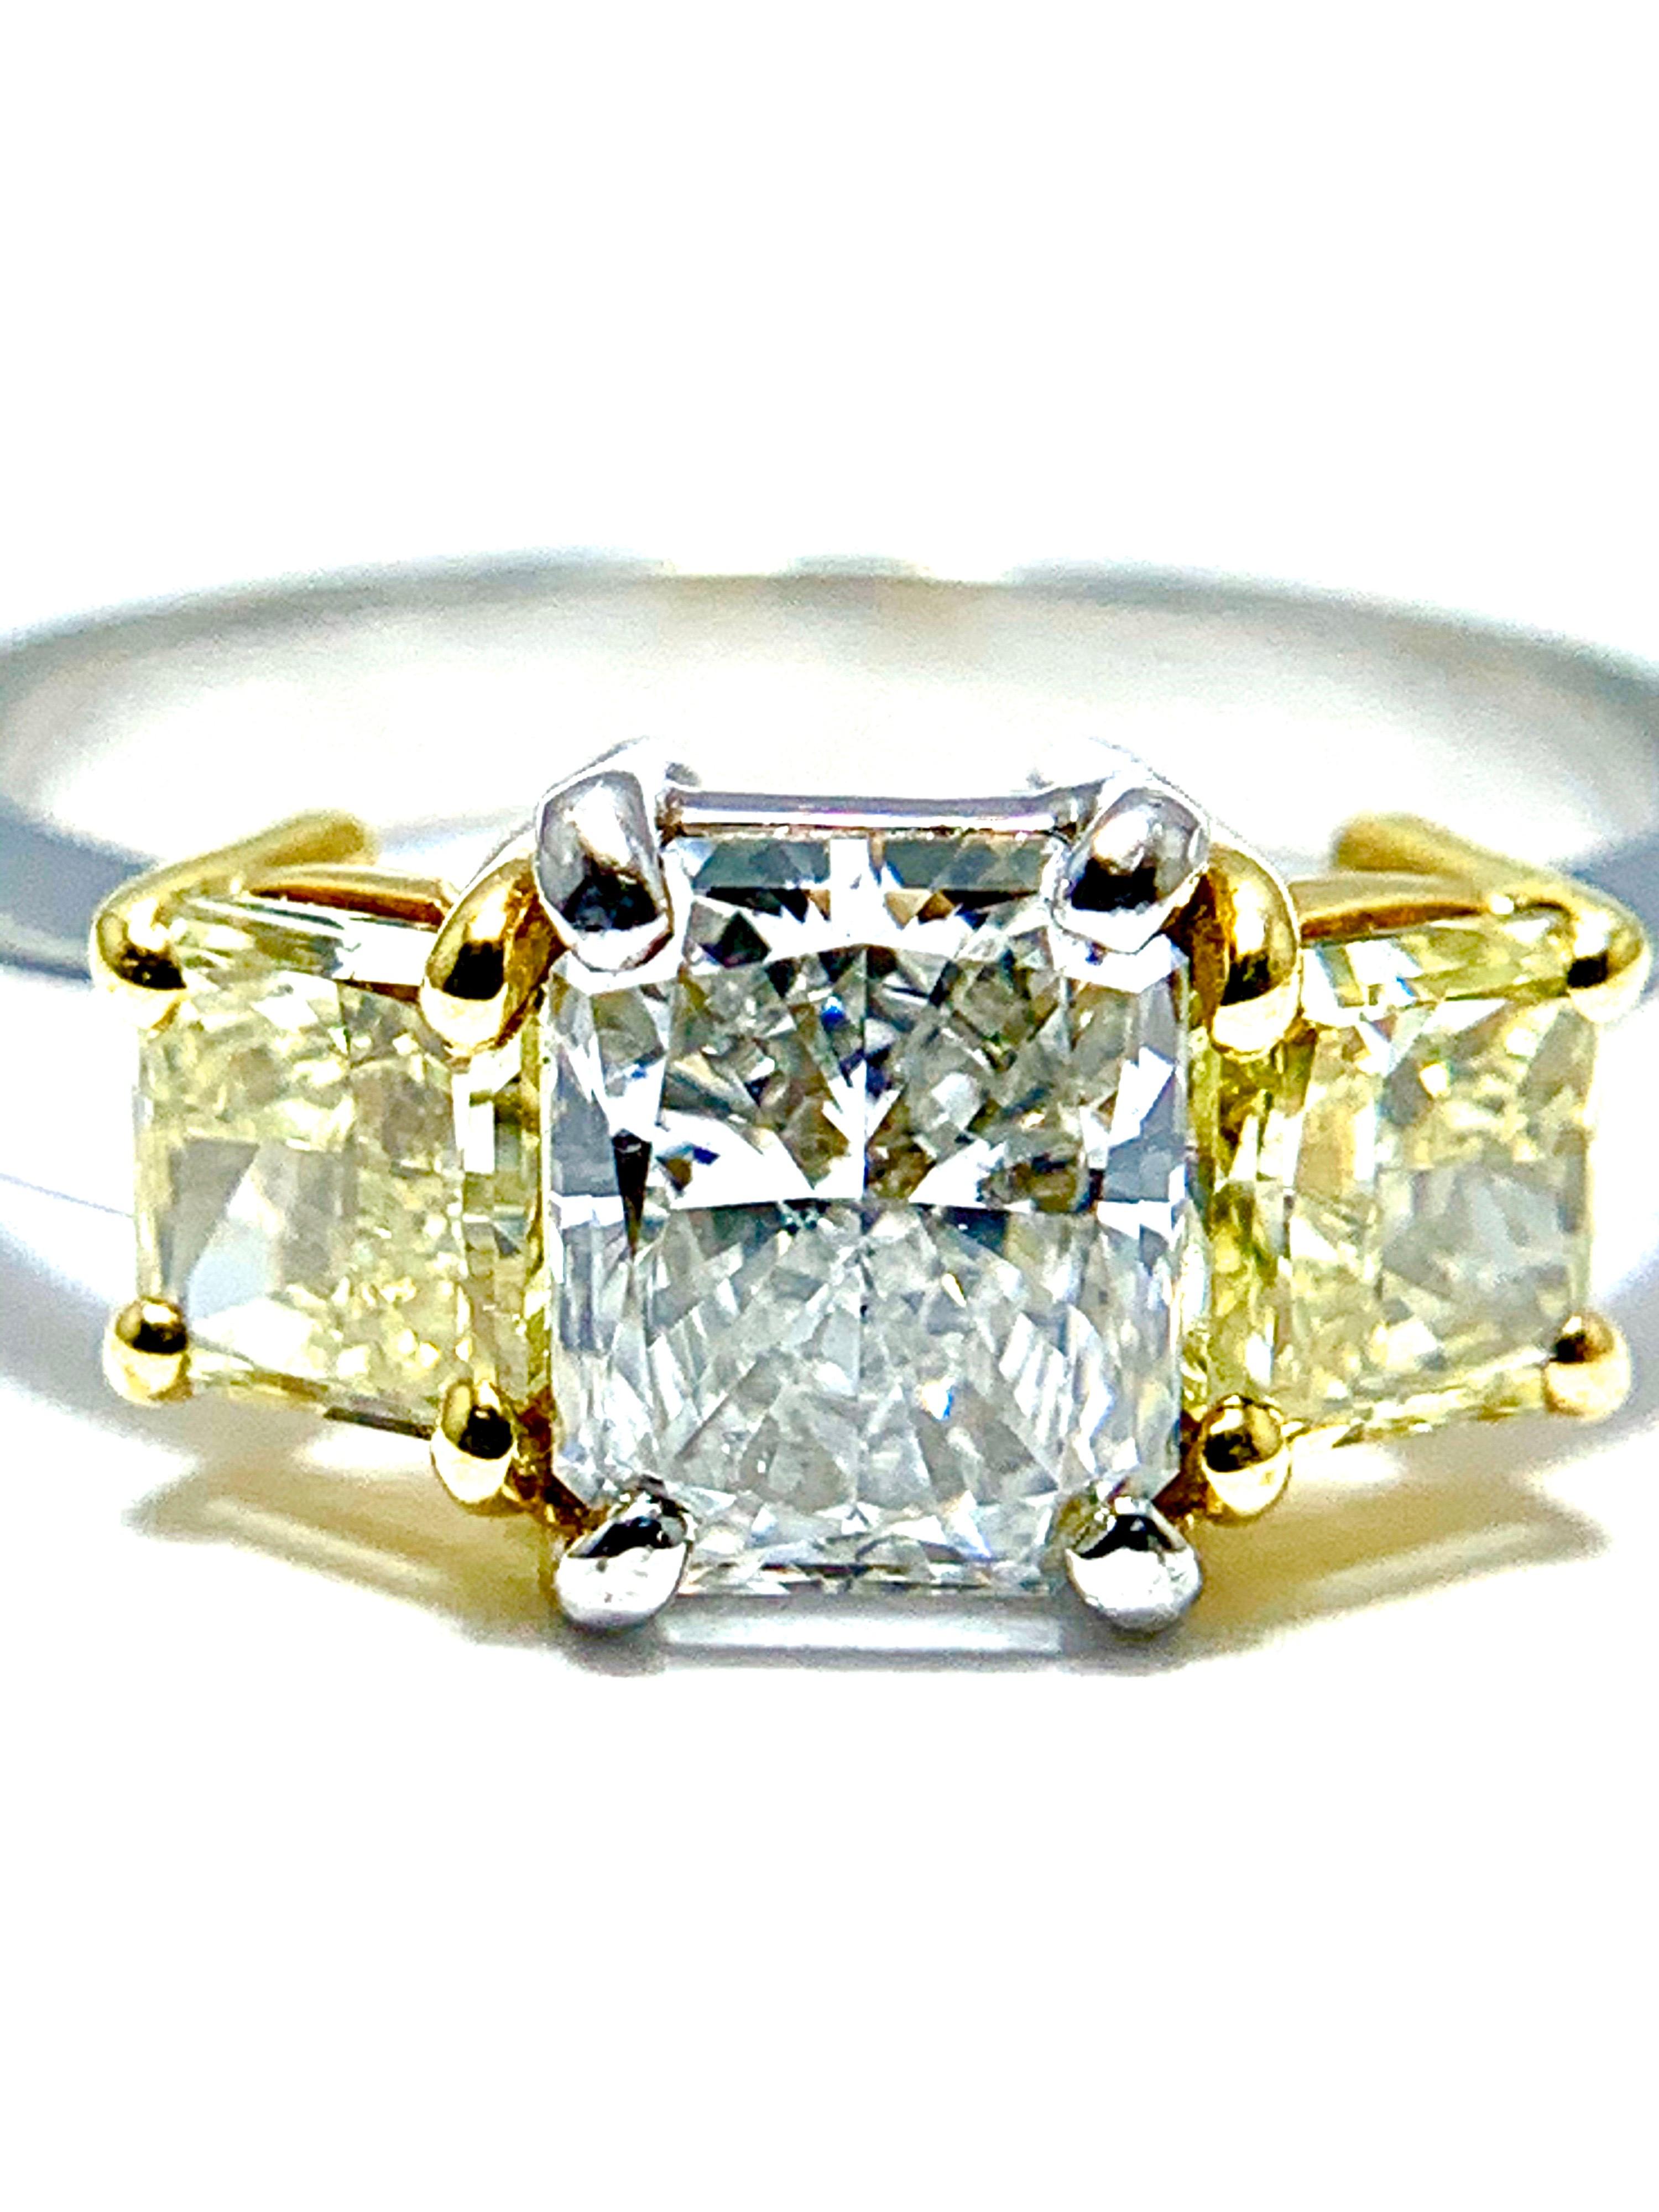 An absolutely stunning three diamond ring.  The center Diamond is a 1.07 carat radiant cut, graded by GIA as a I color, VS2, flanked on either side by two fancy yellow radiant cut Diamonds weighing 0.70 carats total.  The two yellow Diamonds are set